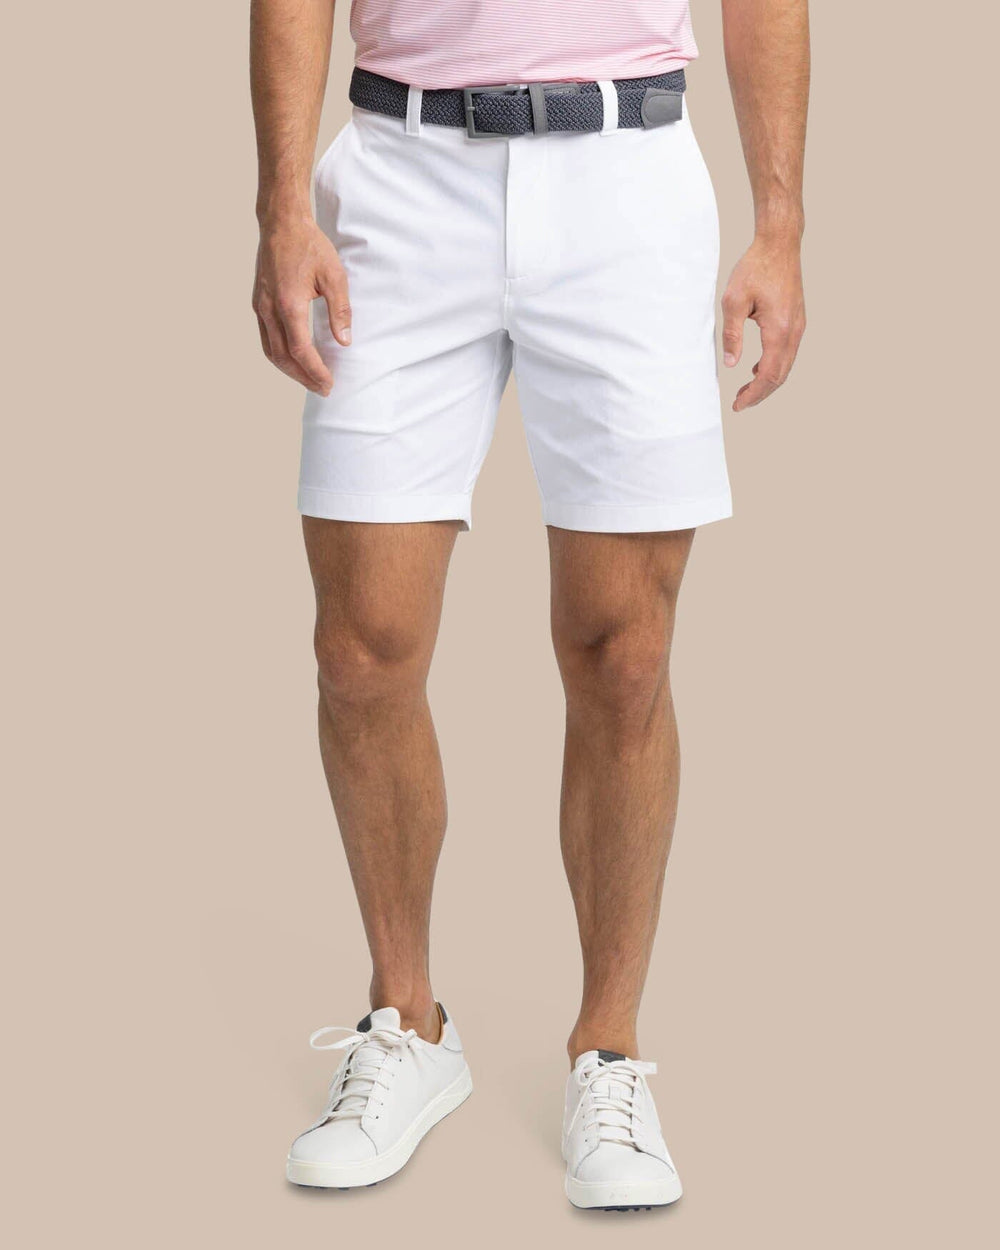 The front view of the Southern Tide gulf 8 inch brrr die performance short by Southern Tide - Classic White